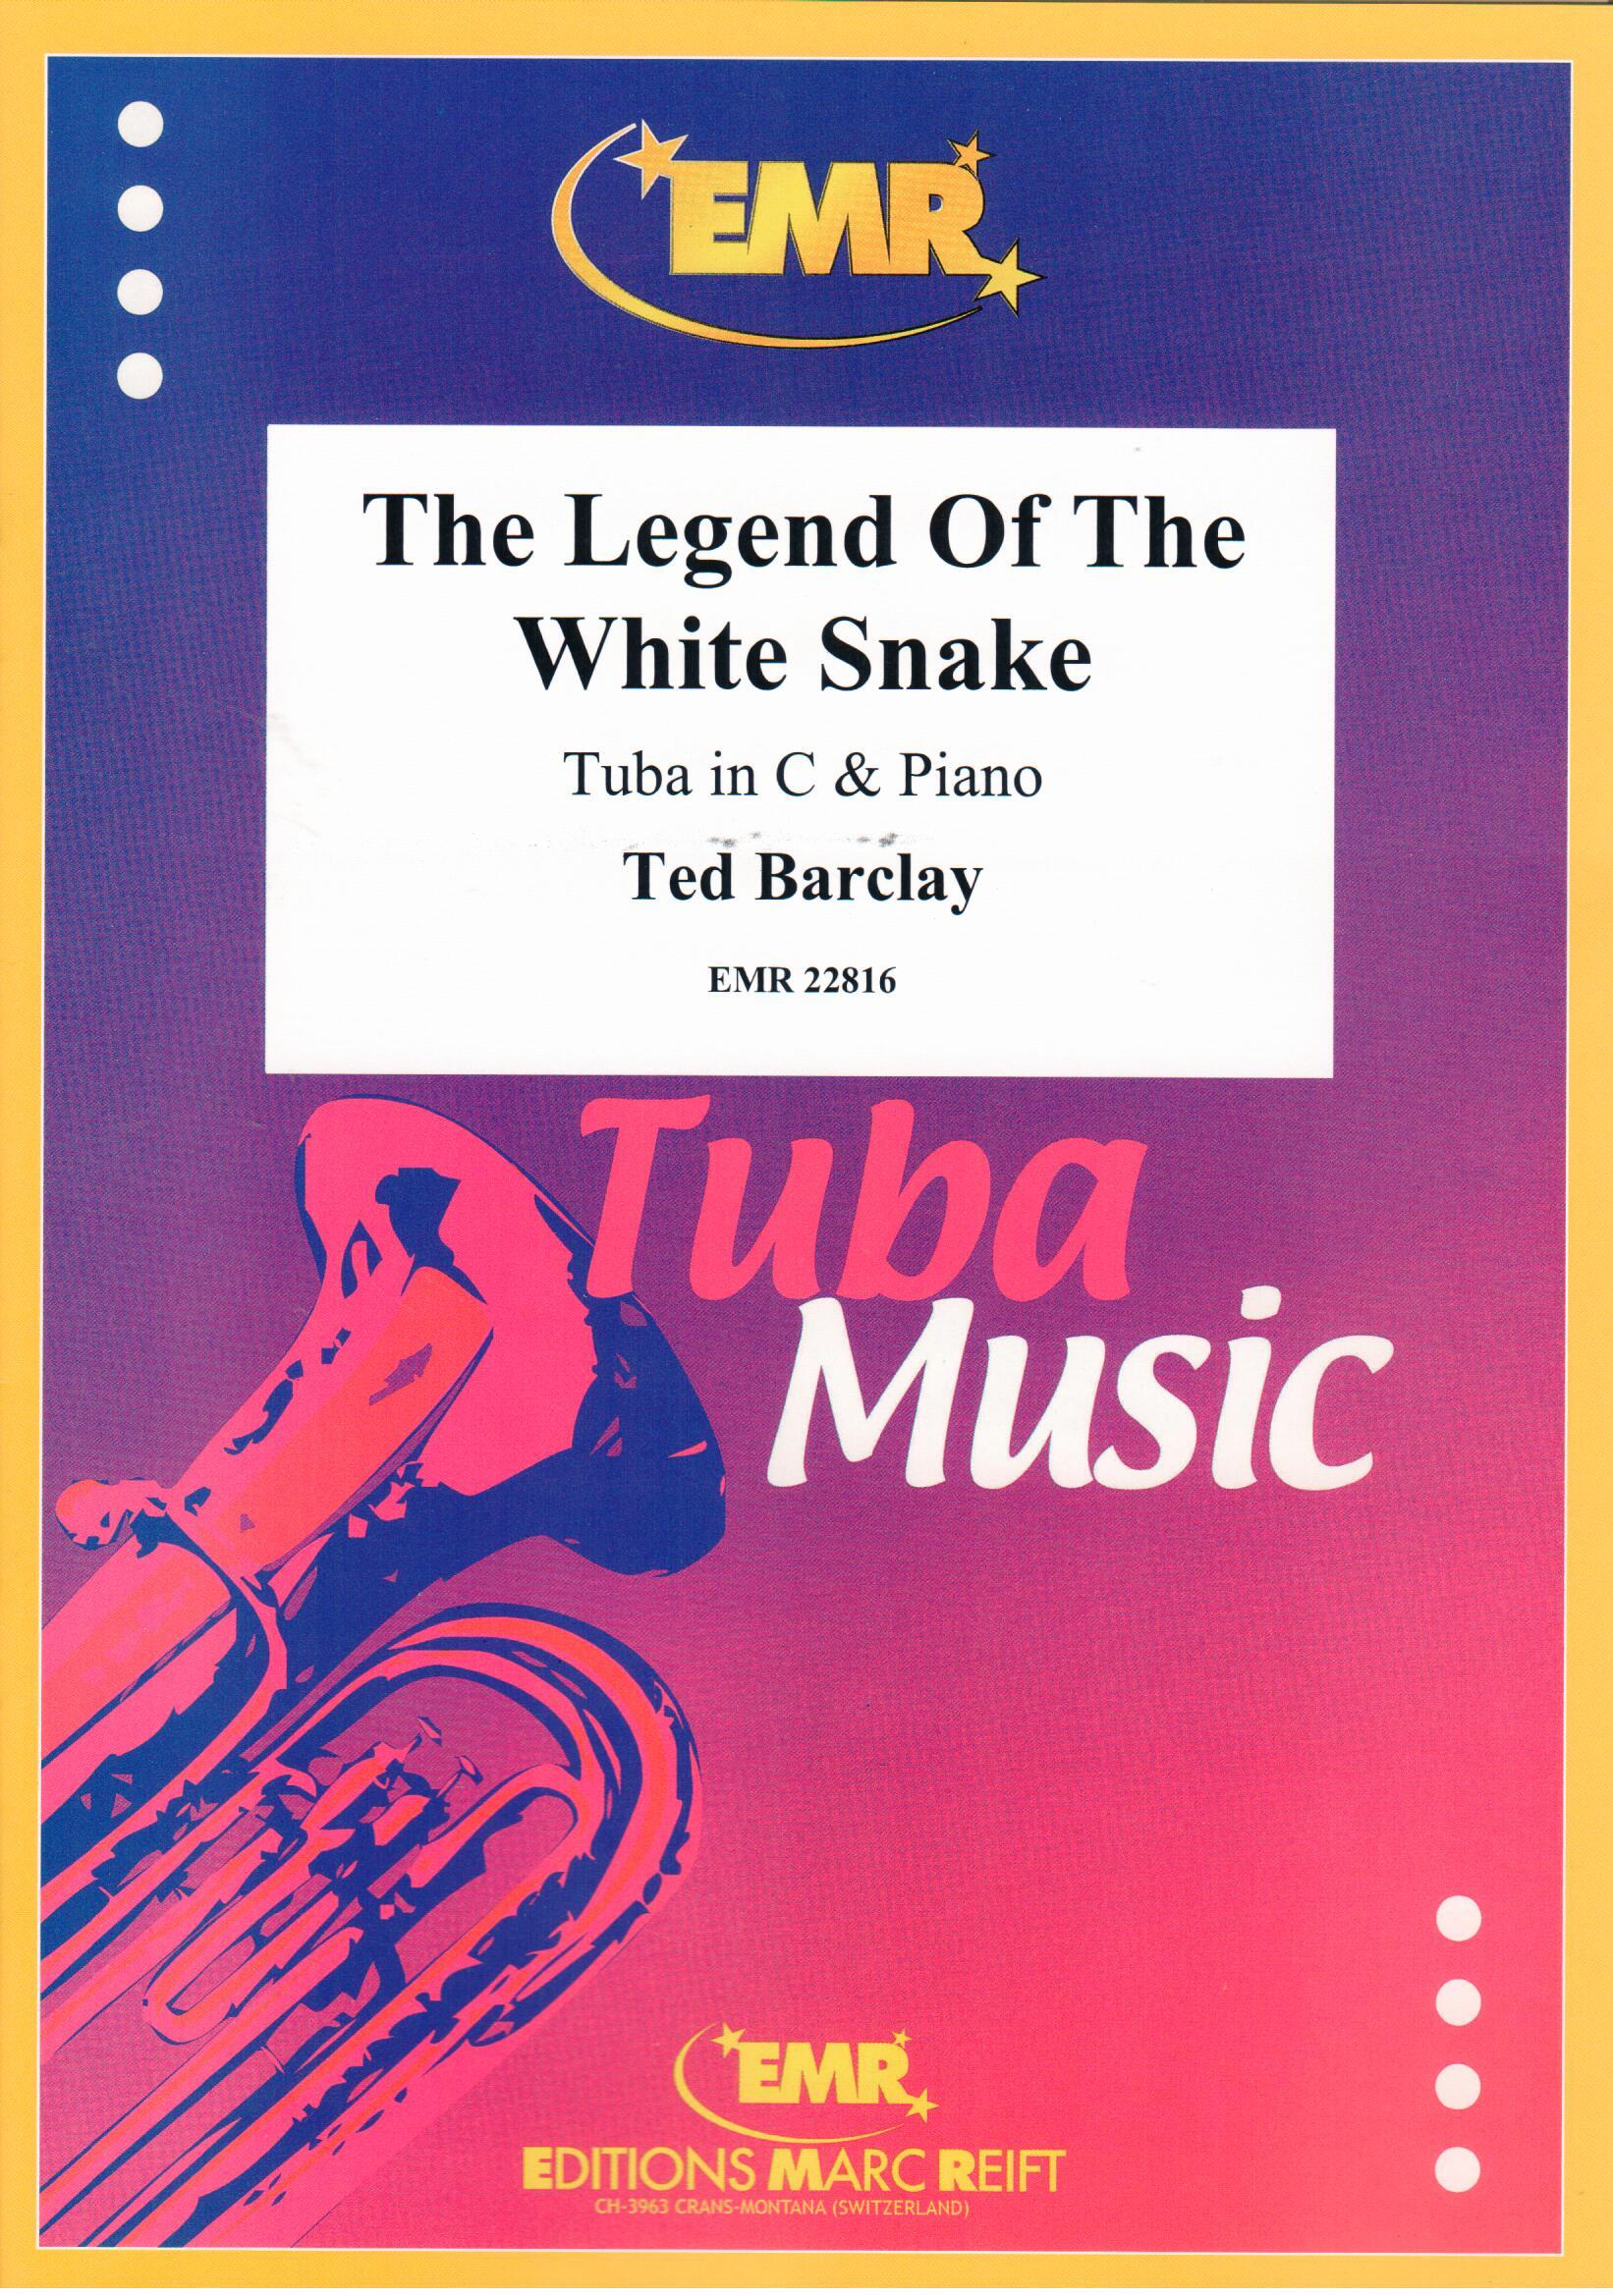 THE LEGEND OF THE WHITE SNAKE